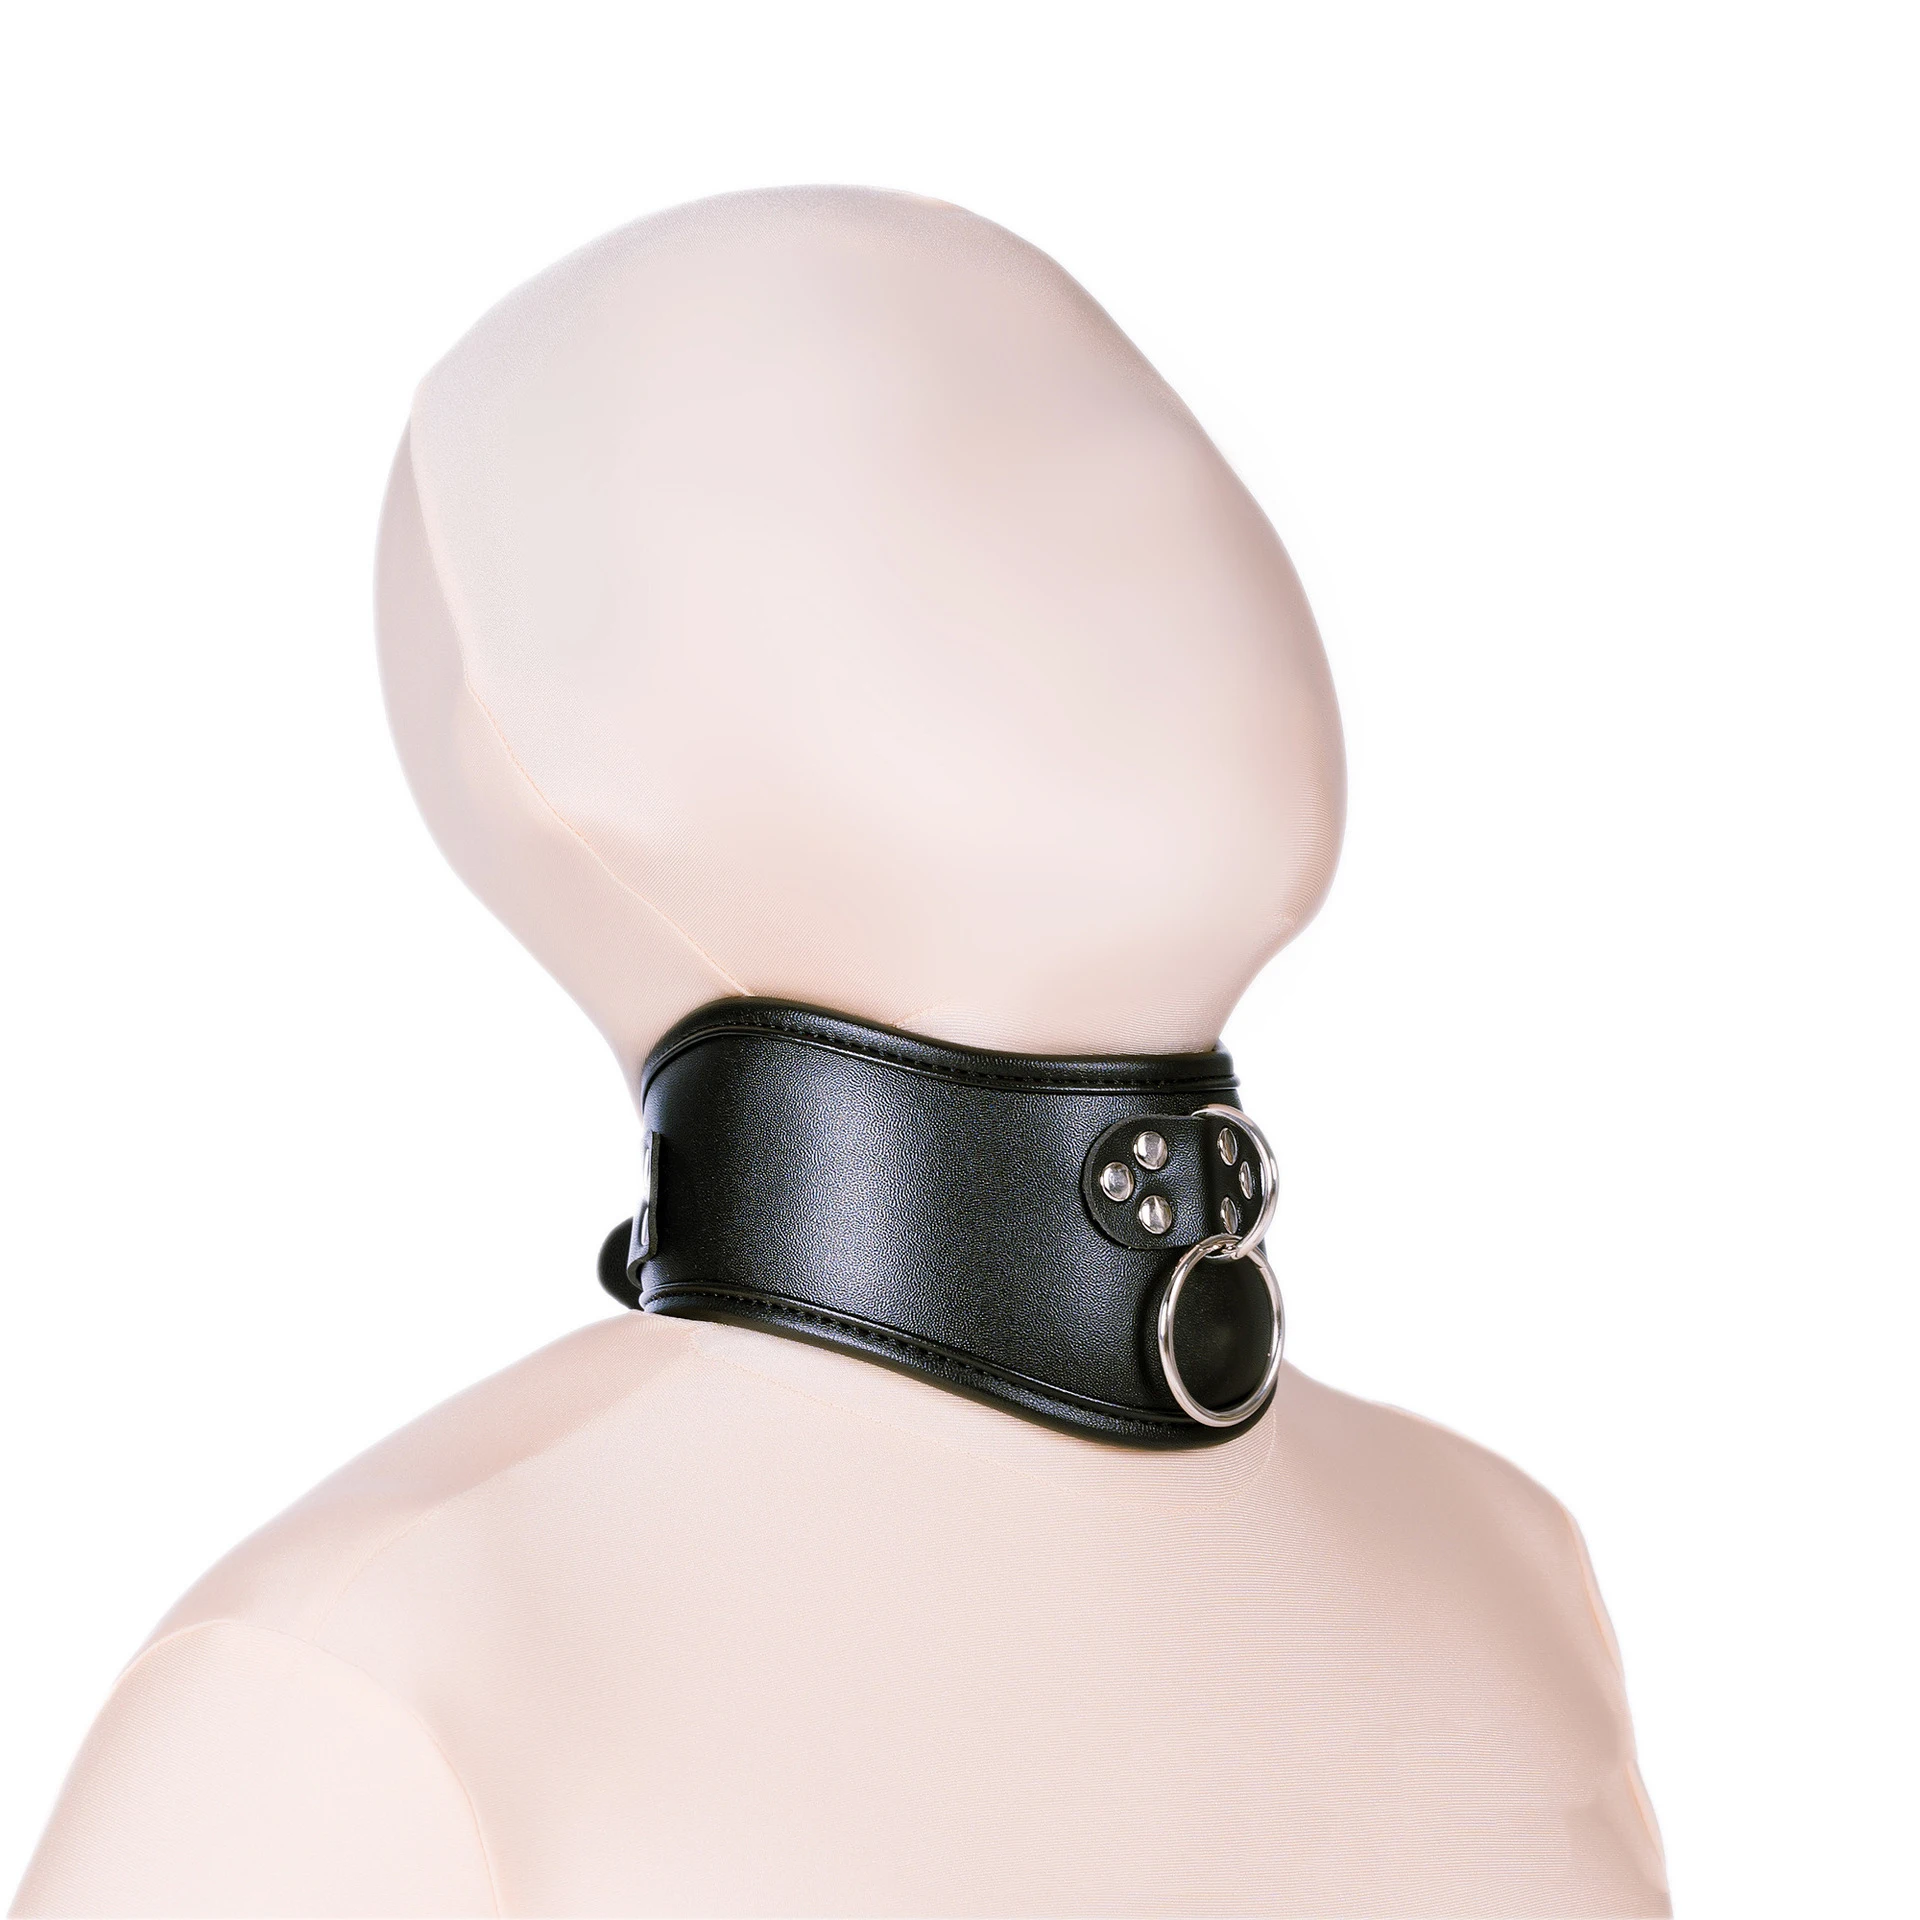 Bdsm leather play collars